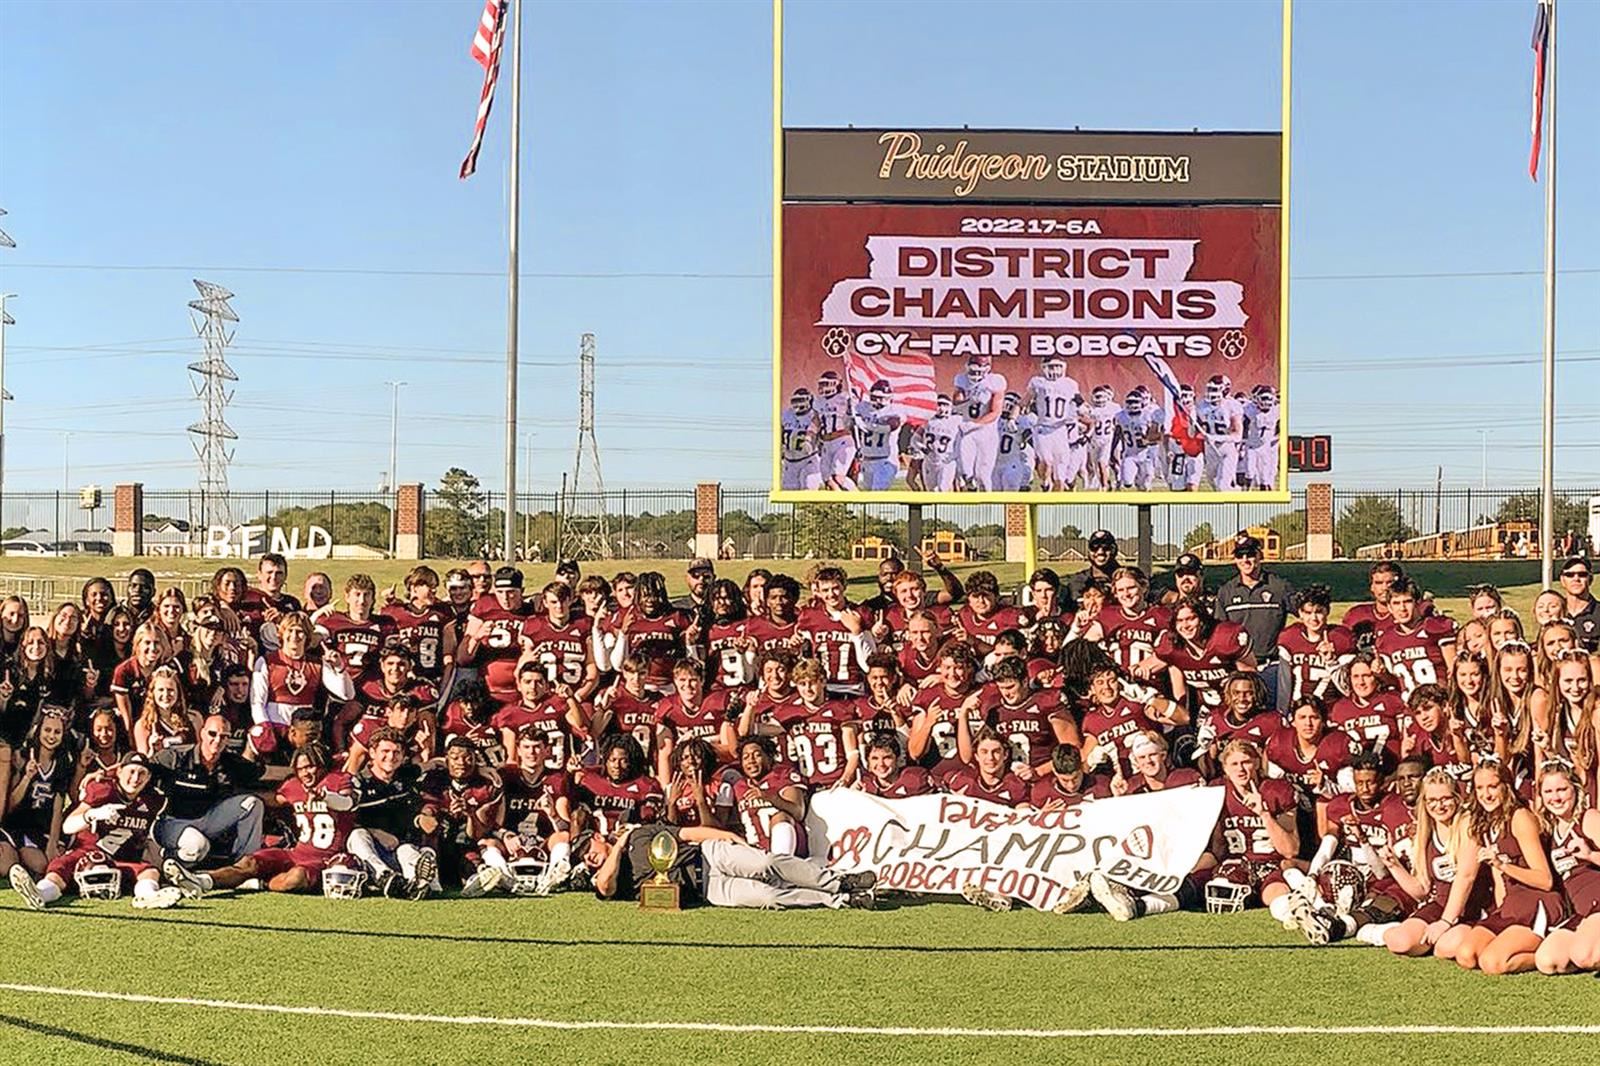 Cy-Fair High School finished with an undefeated 7-0 record to win the District 17-6A championship.